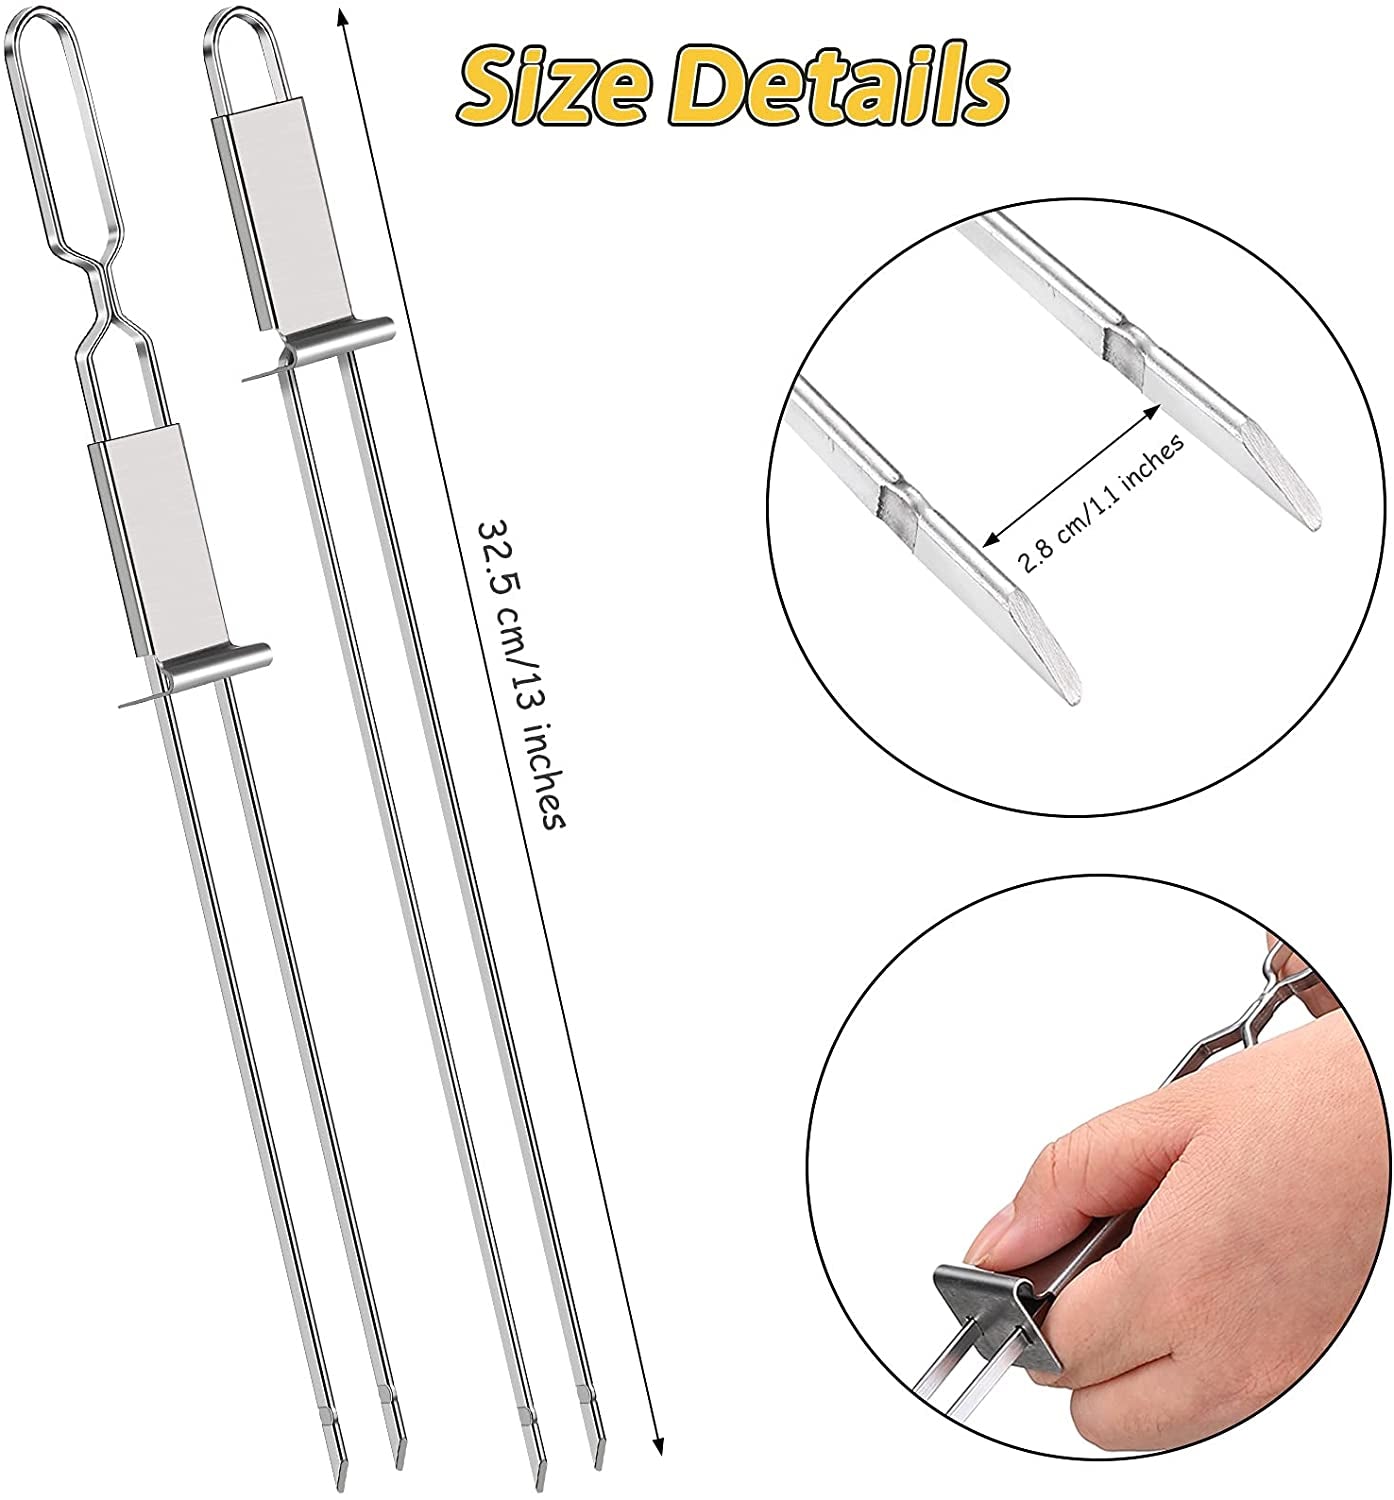 Lallisa, Lallisa 12 Pieces Kabob Skewer for Grilling, Metal Stainless Steel BBQ Skewer Stick with Push Bar, Reusable Double Pronged Kebab Skewer Tool Quick Release Meat, Chicken, Vegetable and Fruit, 13 Inch